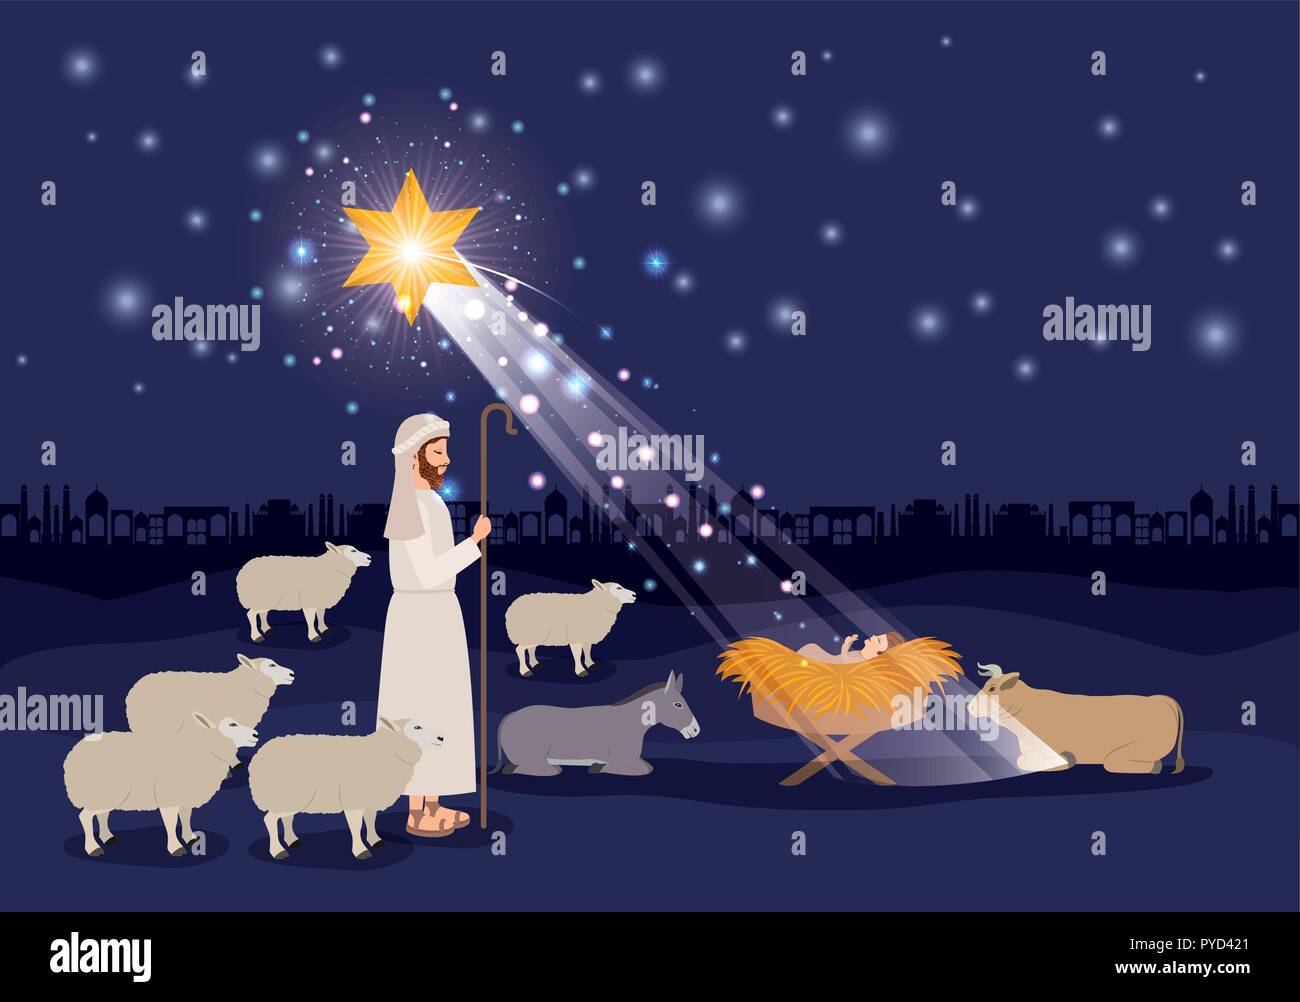 merry christmas card with jesus baby and sheeper Stock Vector ...